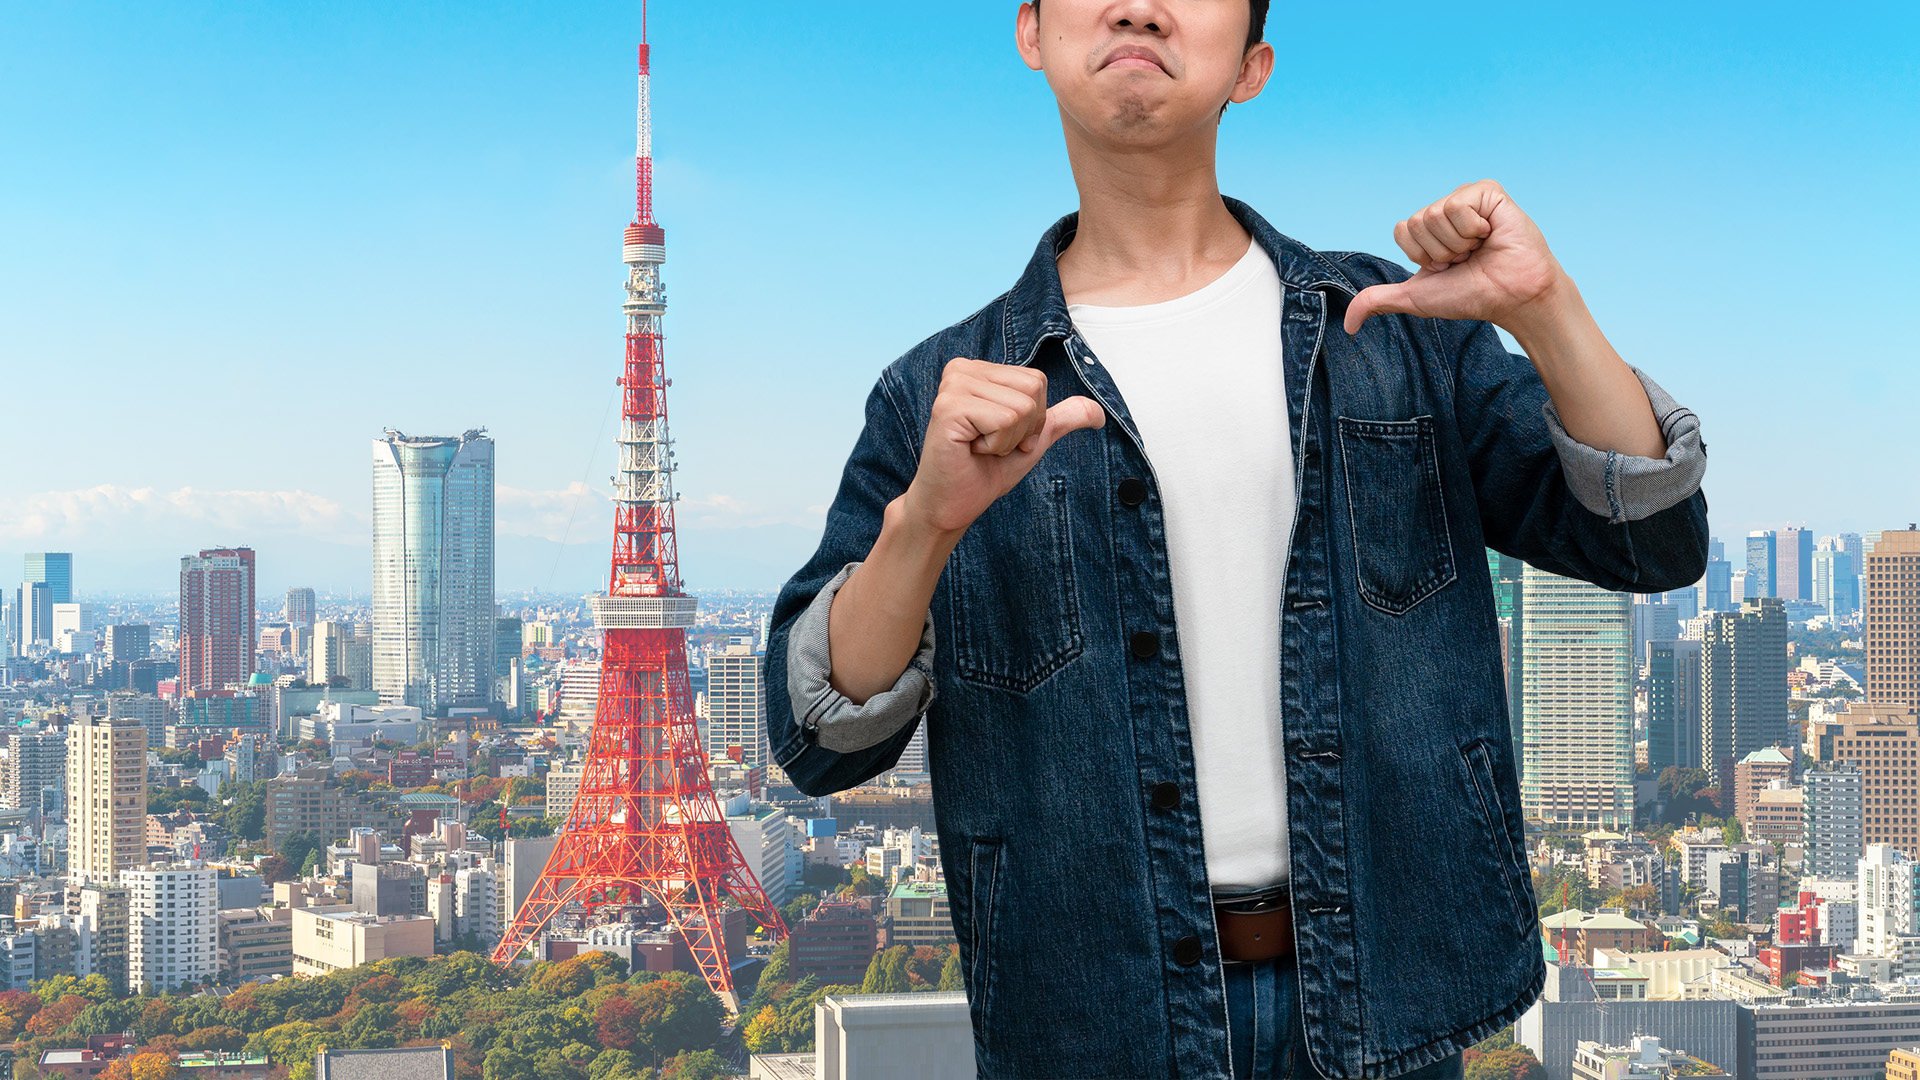 An unemployed man from China who posed as a female student in Japan to hurl online insults at Chinese people and the country has been detained by mainland police. Photo: SCMP composite/Shutterstock